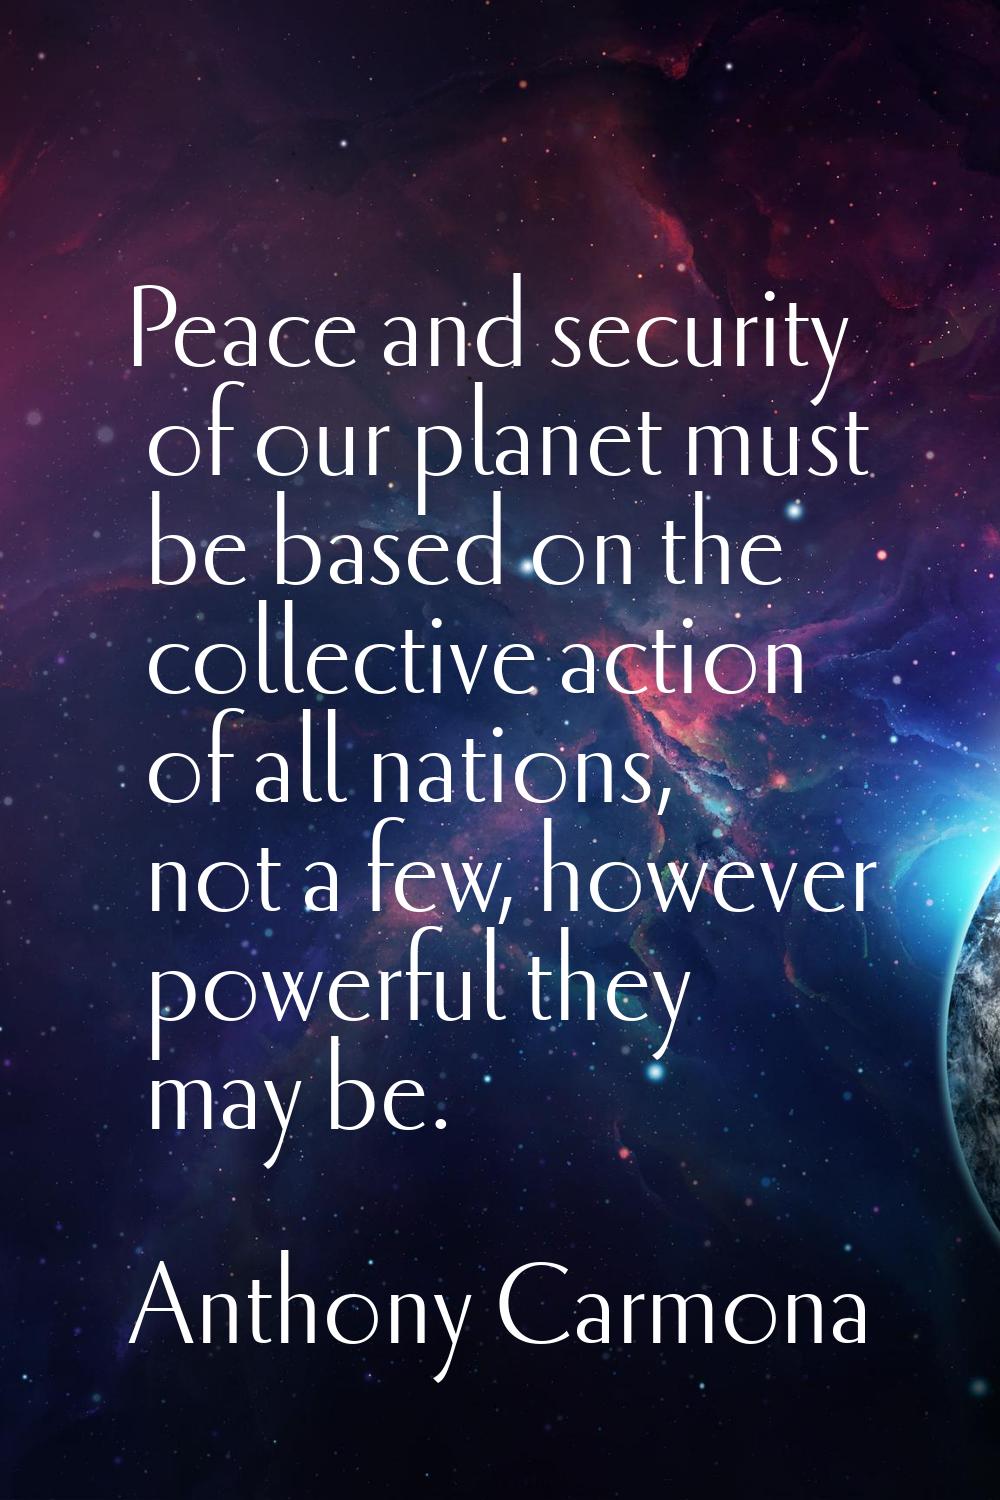 Peace and security of our planet must be based on the collective action of all nations, not a few, 